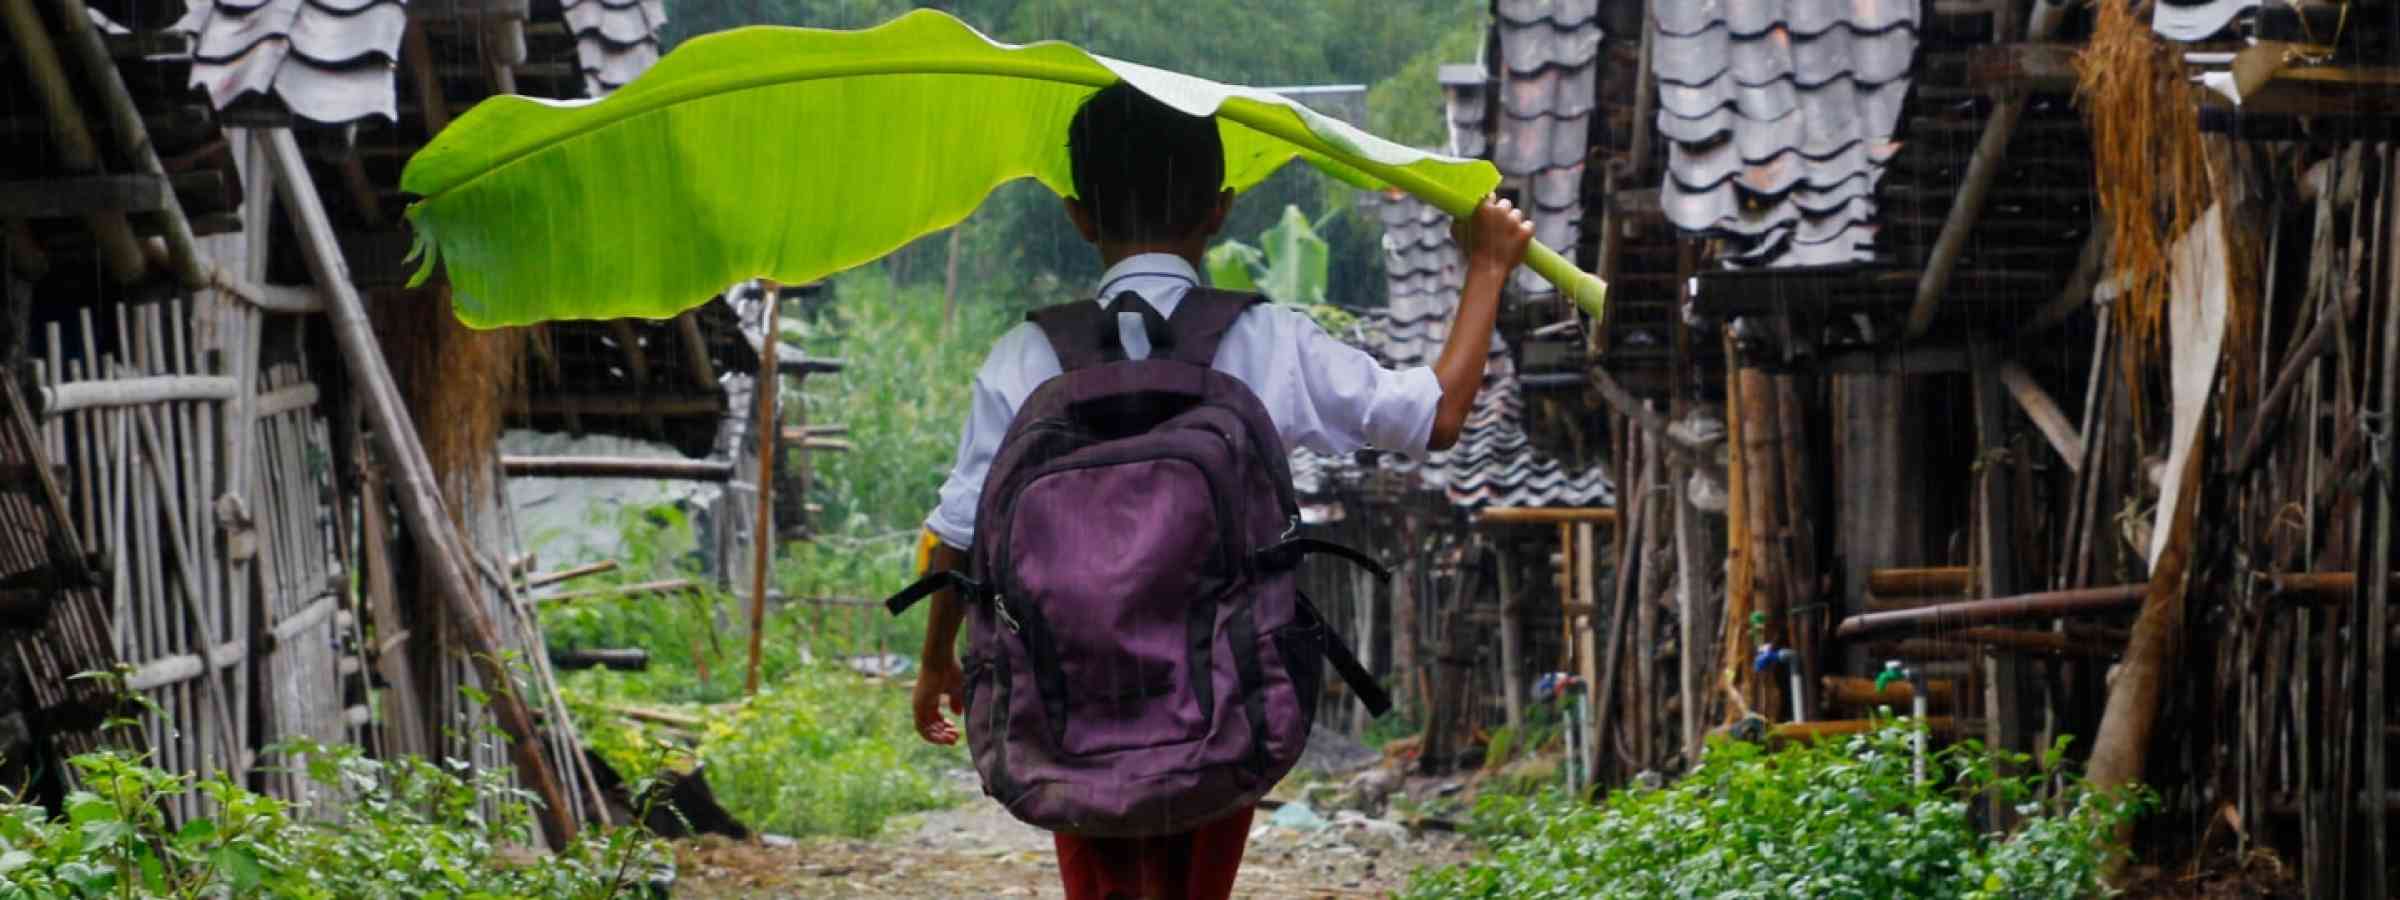  An elementary school student walks in the rain, taking cover with banana leaves.